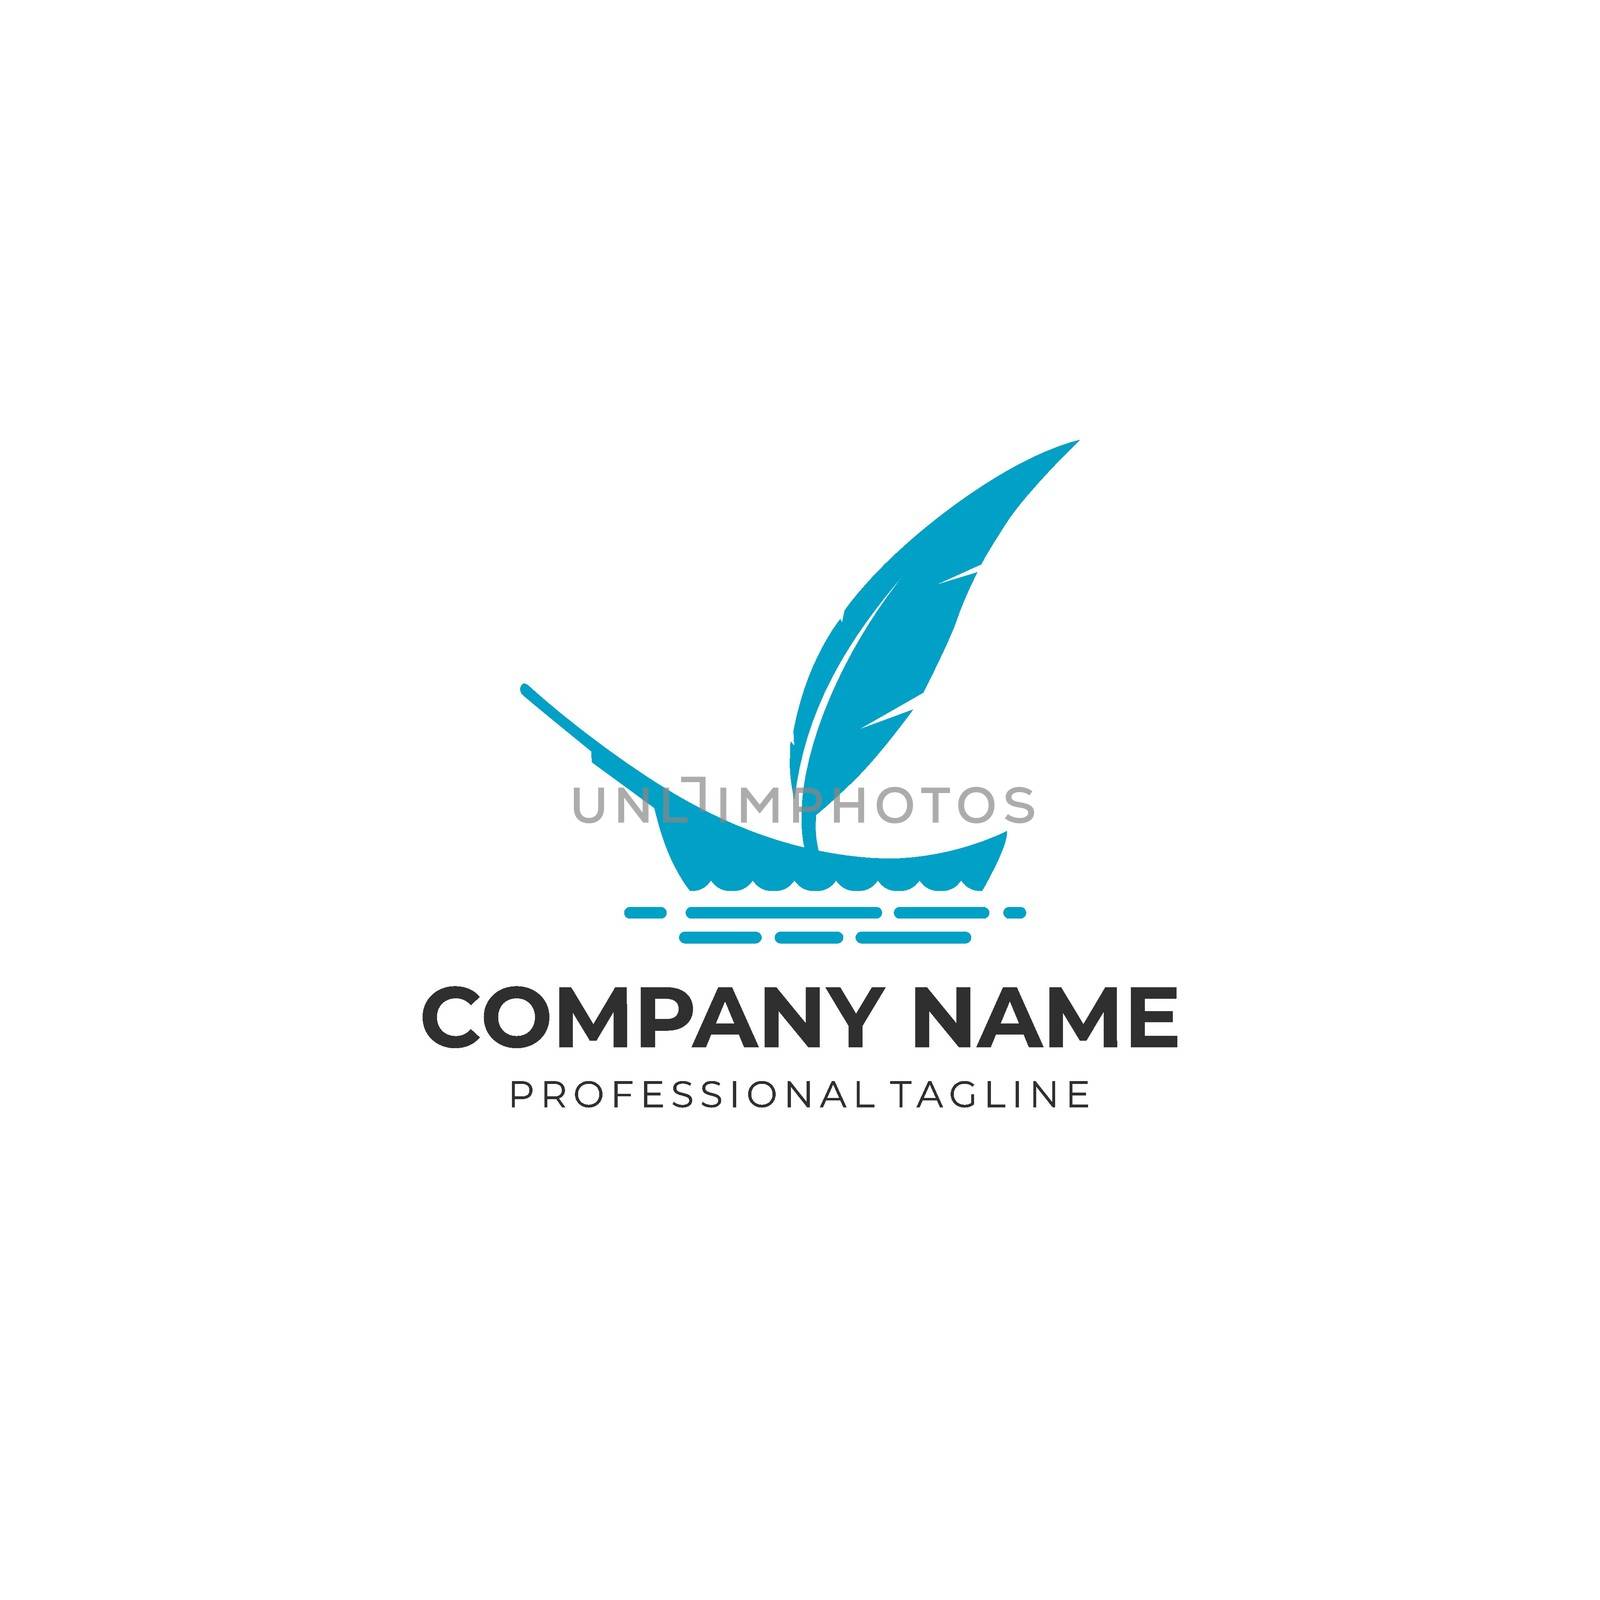 press writer journalist logo business template. sail boat and feather elements. flat design isolated on white background.